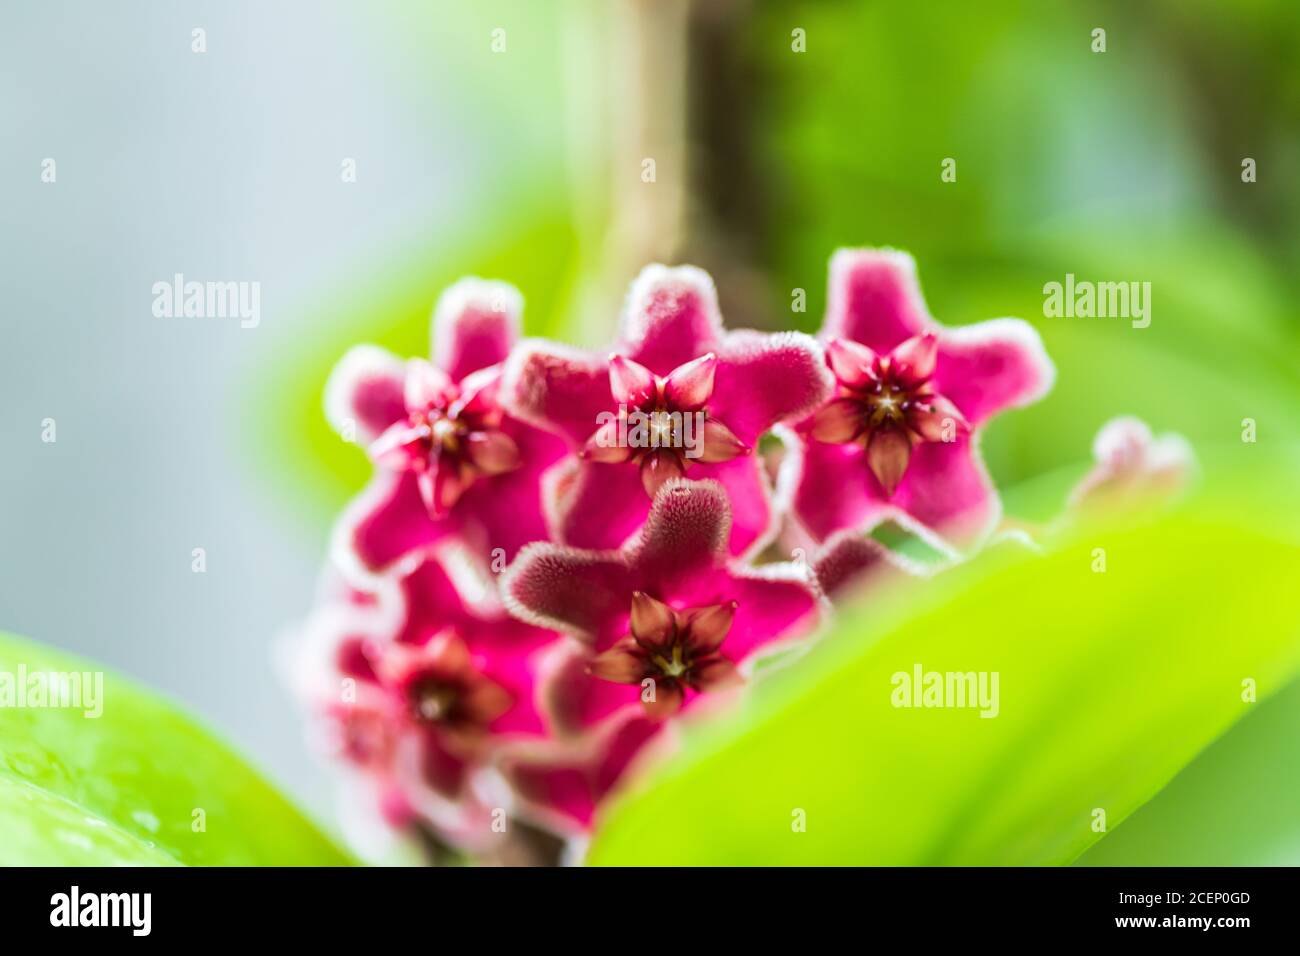 Close up of star shaped red and pink flowers of Hoya carnosa or porcelain flower or wax plant. Stock Photo